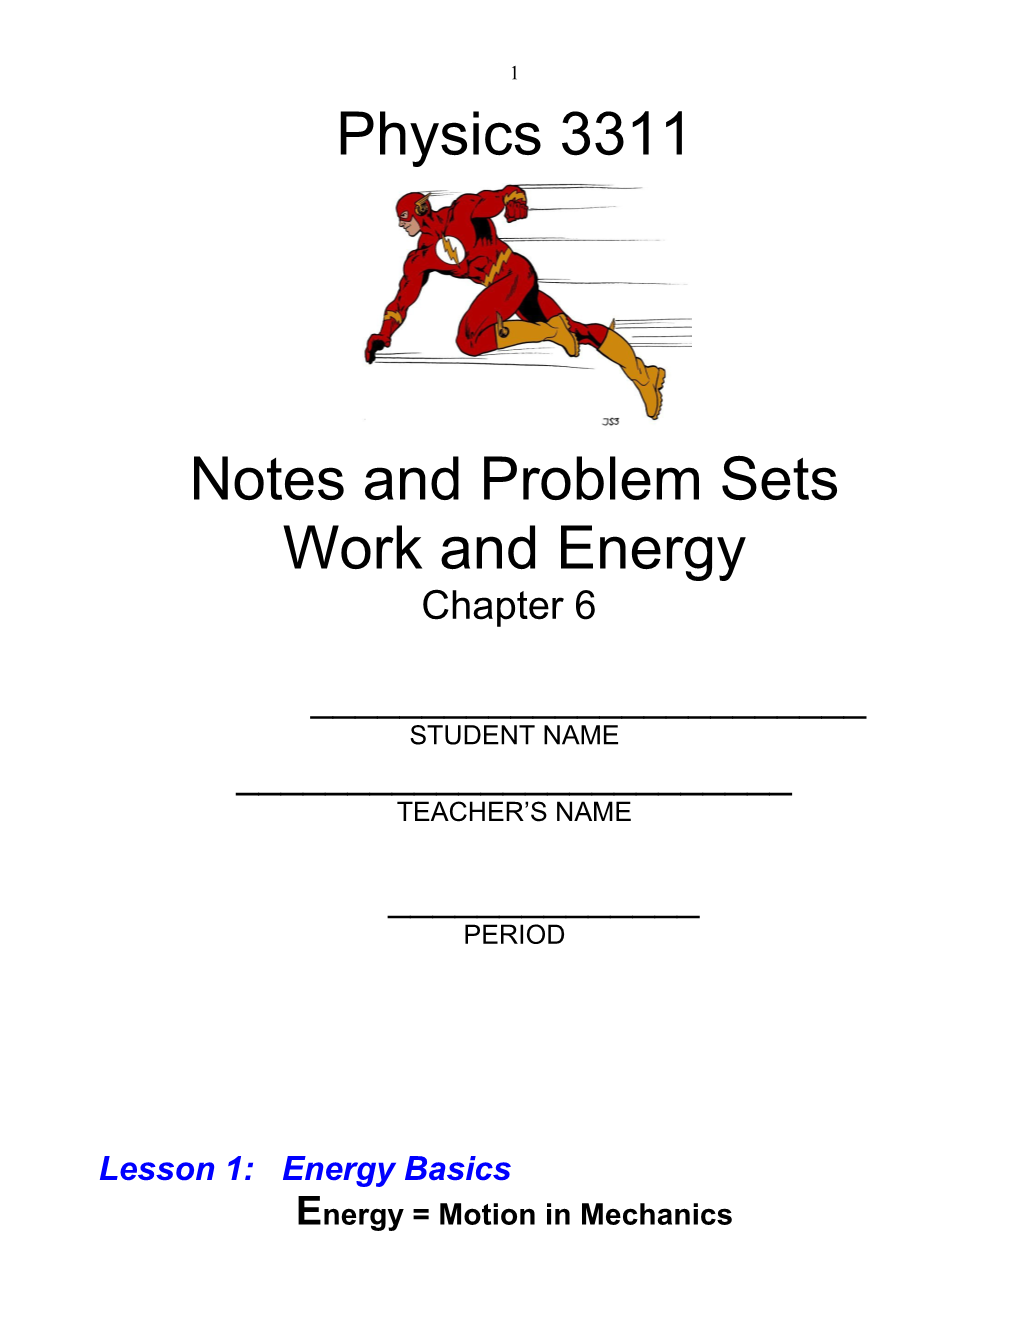 Notes and Problem Sets s1